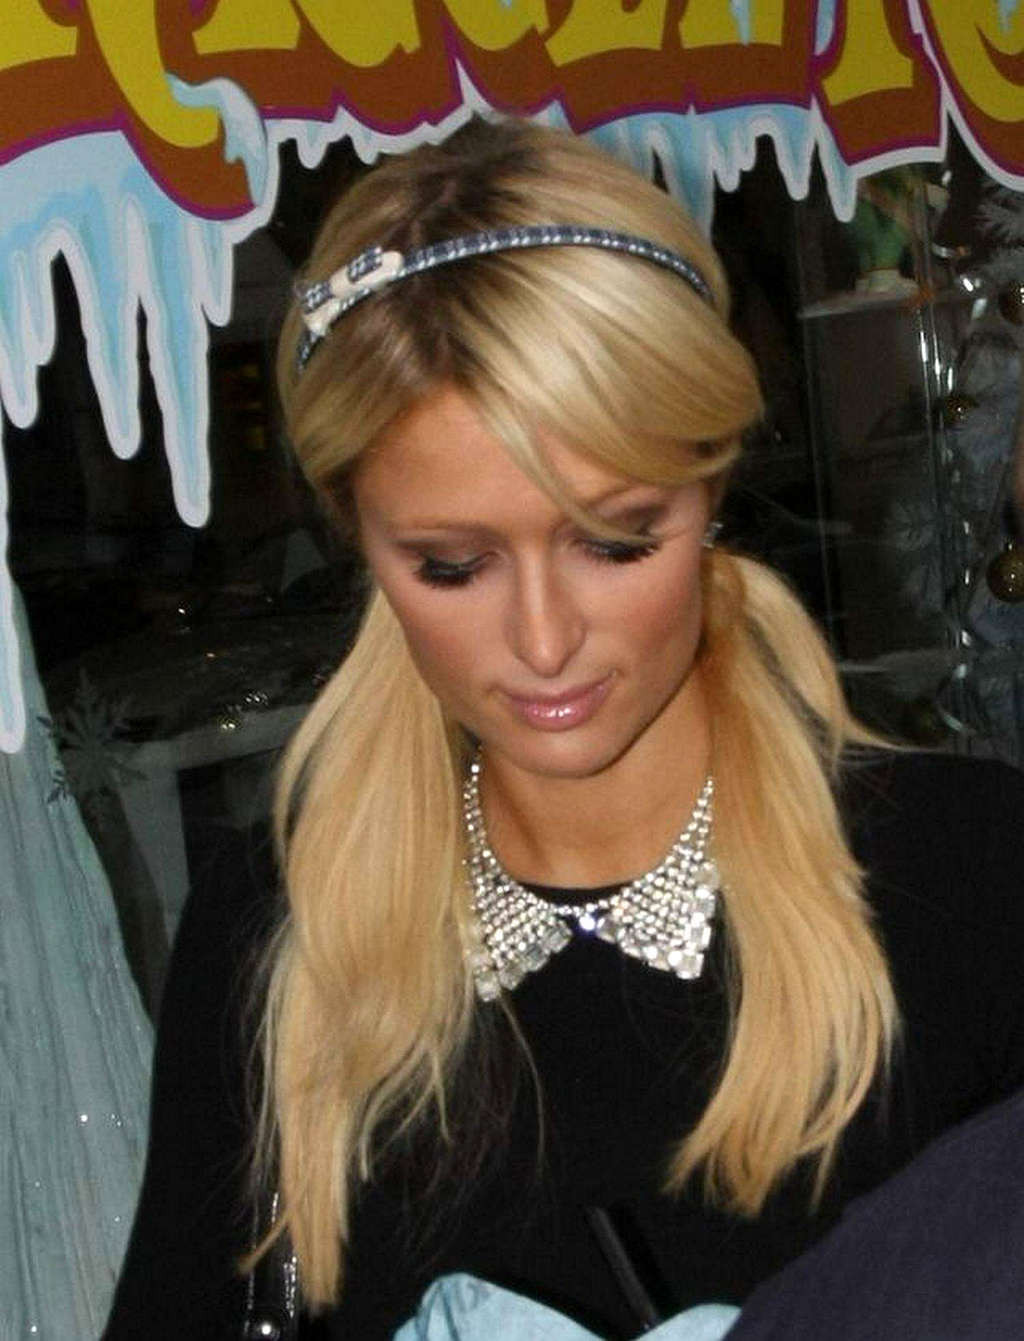 Paris Hilton looking sexy in skirt and black stockings paparazzi pictures and ex #75367974